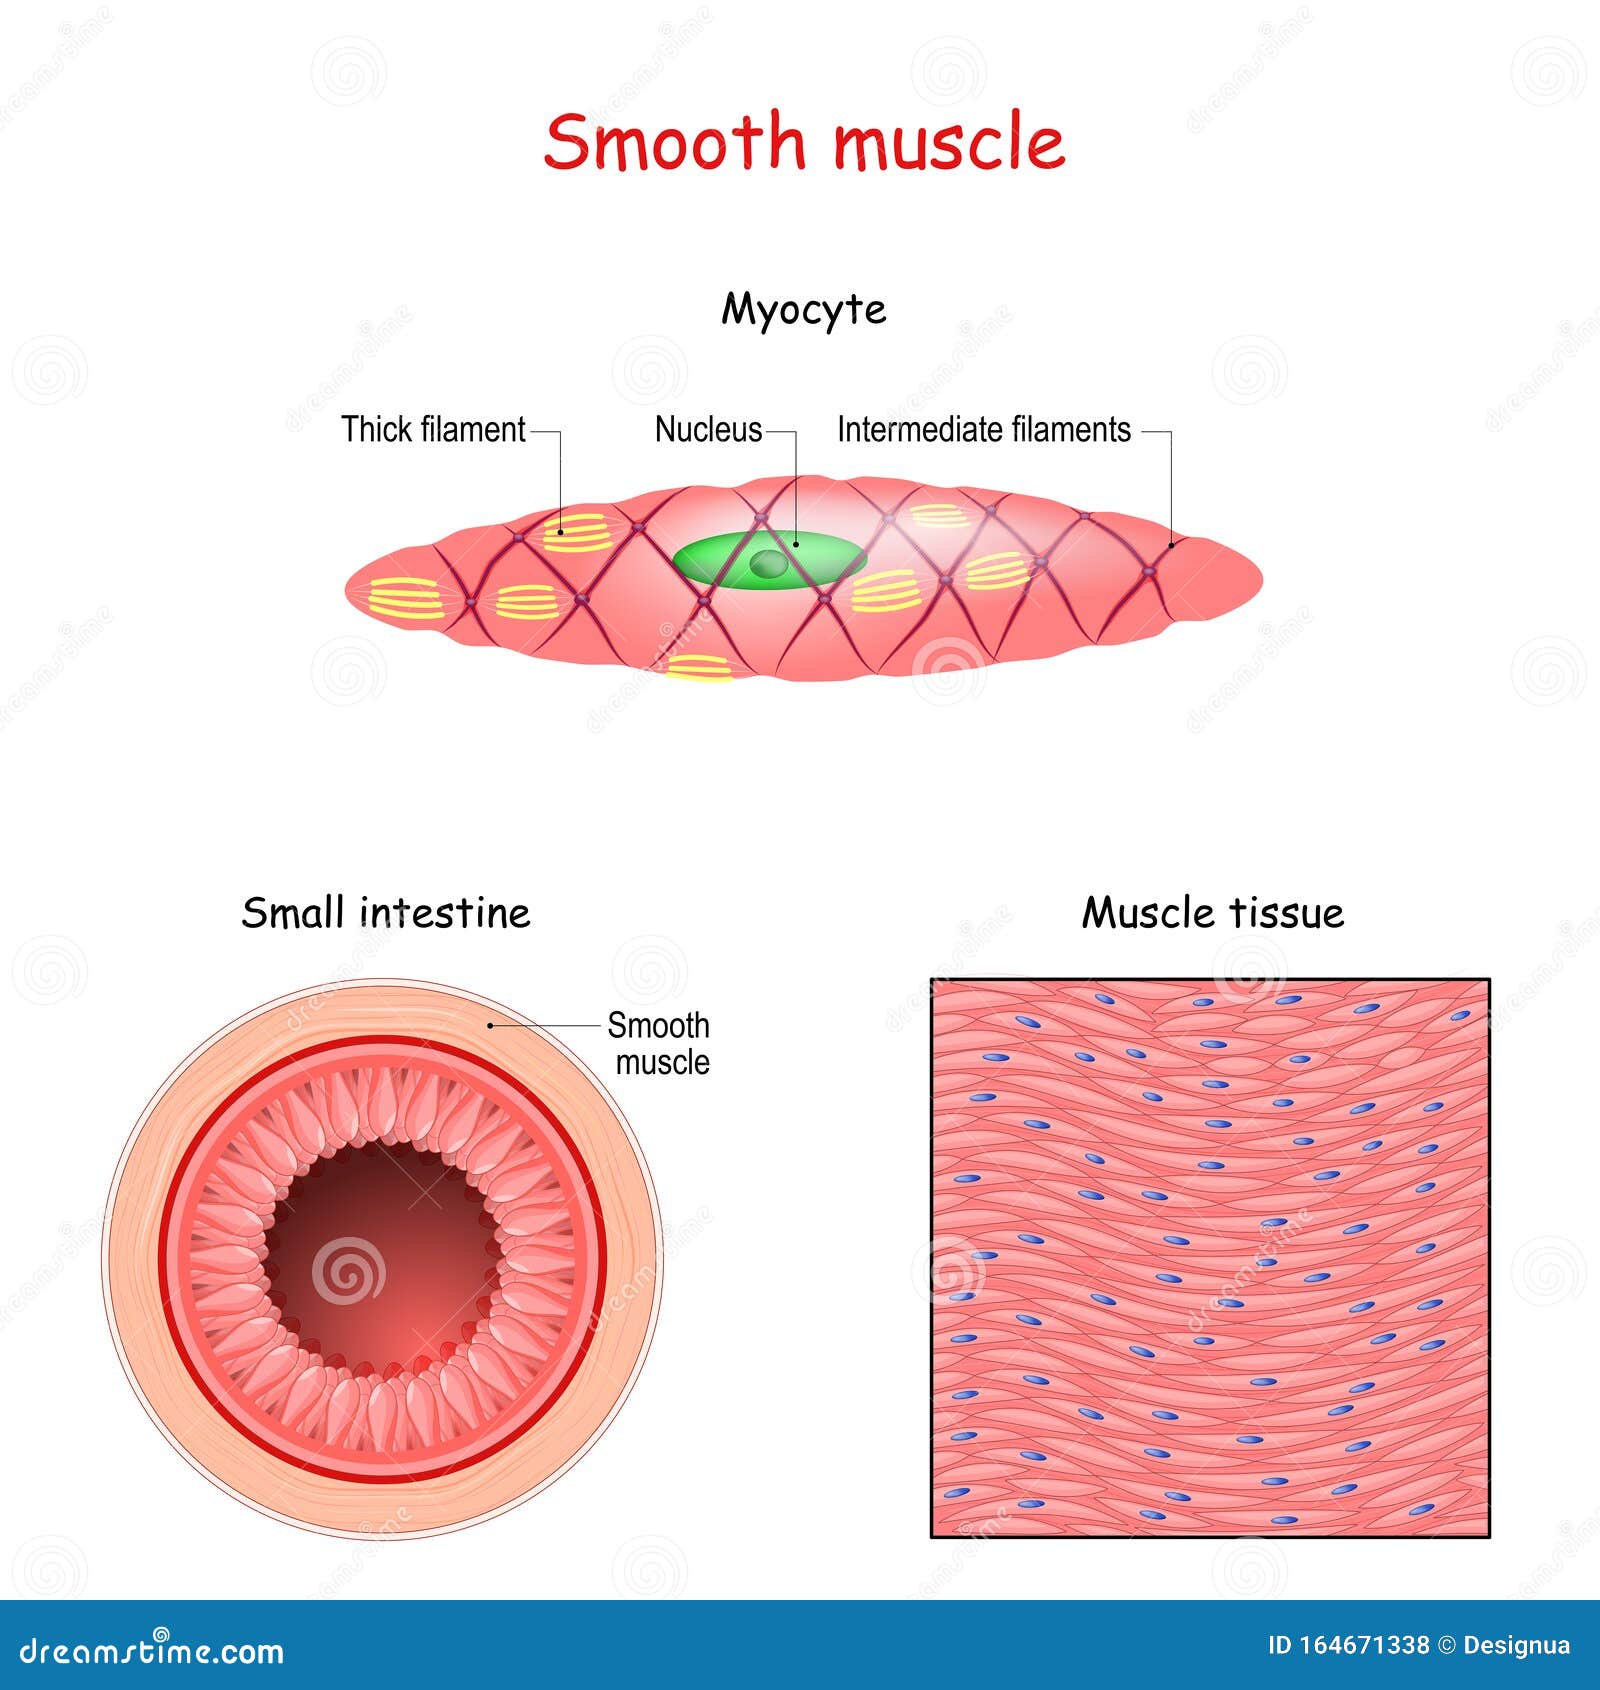 structure of smooth muscle fibers. anatomy of myocyte